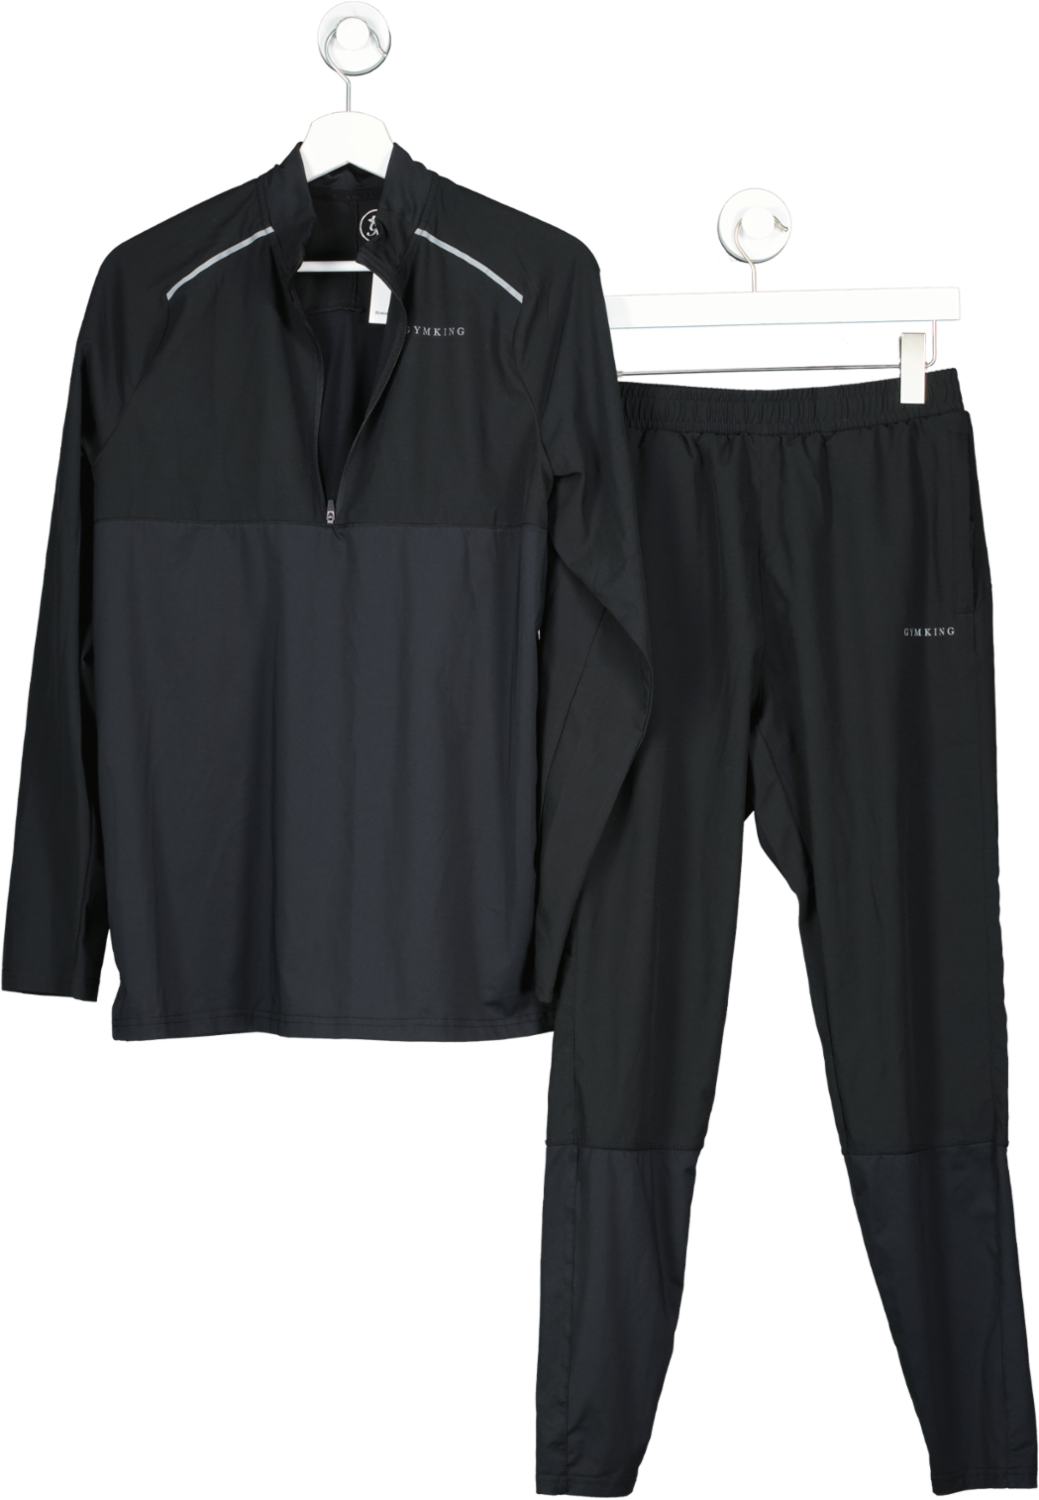 GYM KING Black Tapered Logo Trousers And Quater Zip Top, Uk M UK S